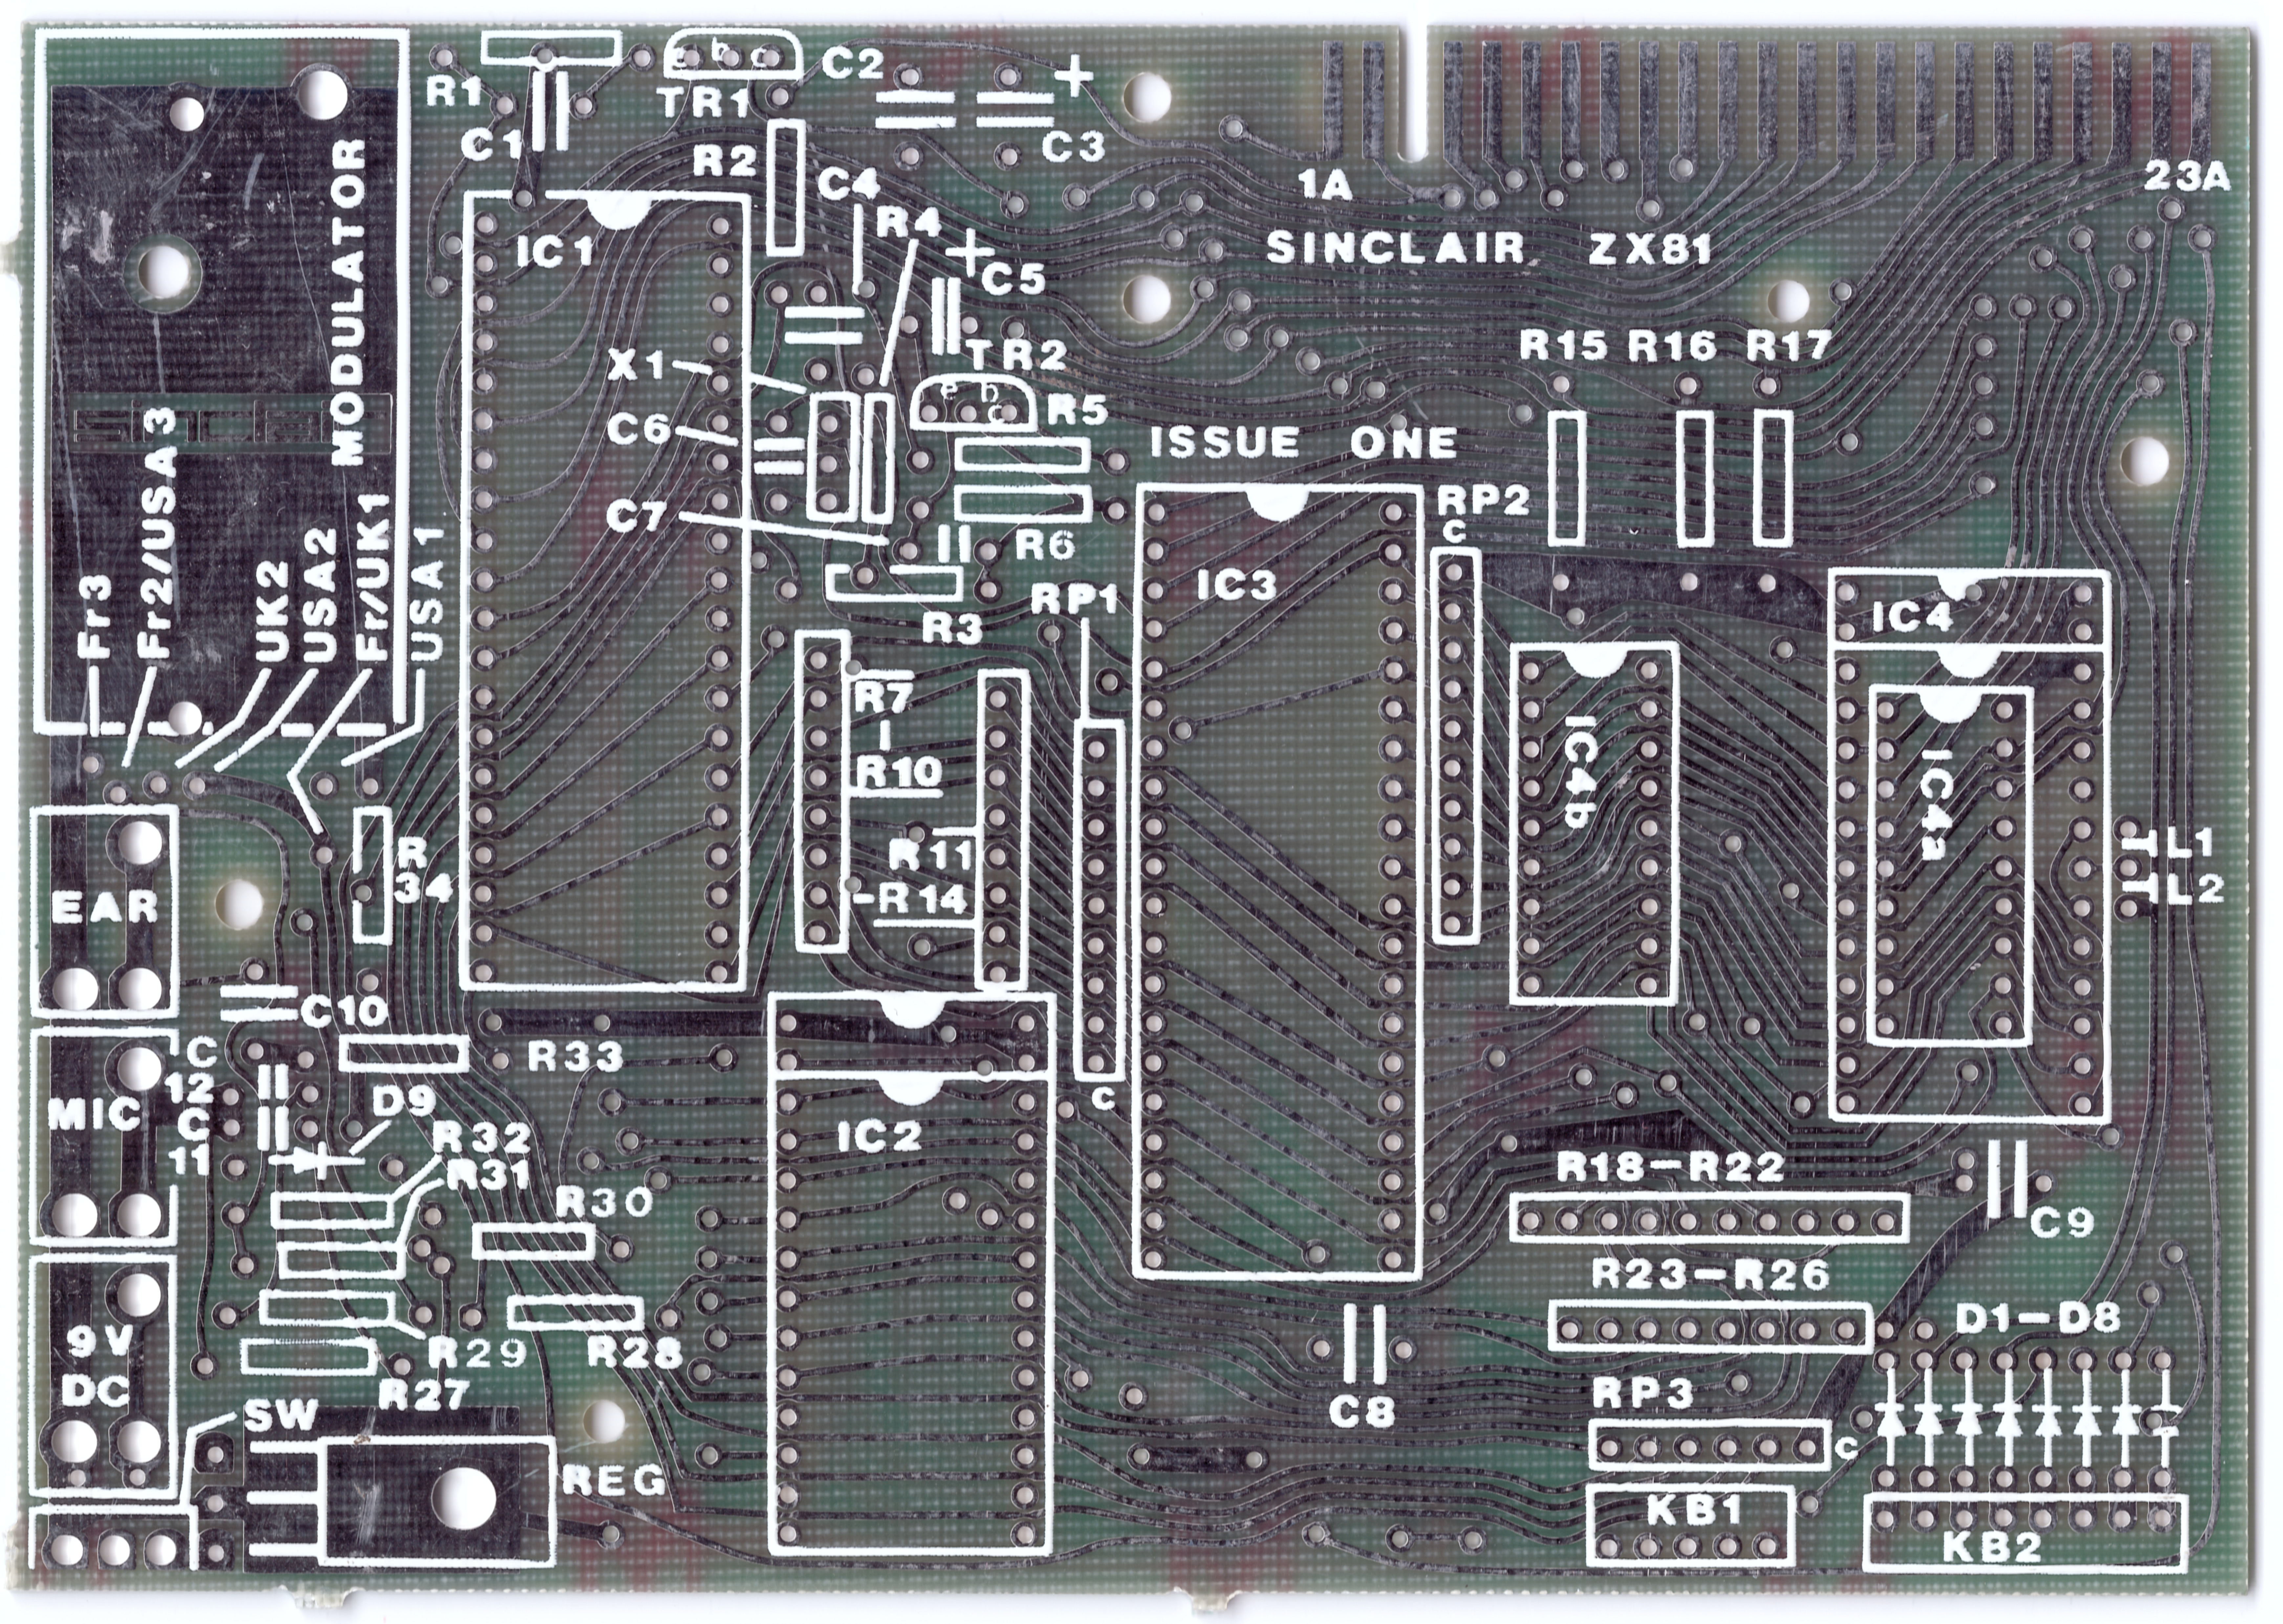 Sinclair ZX81 Kit – pagetable.com